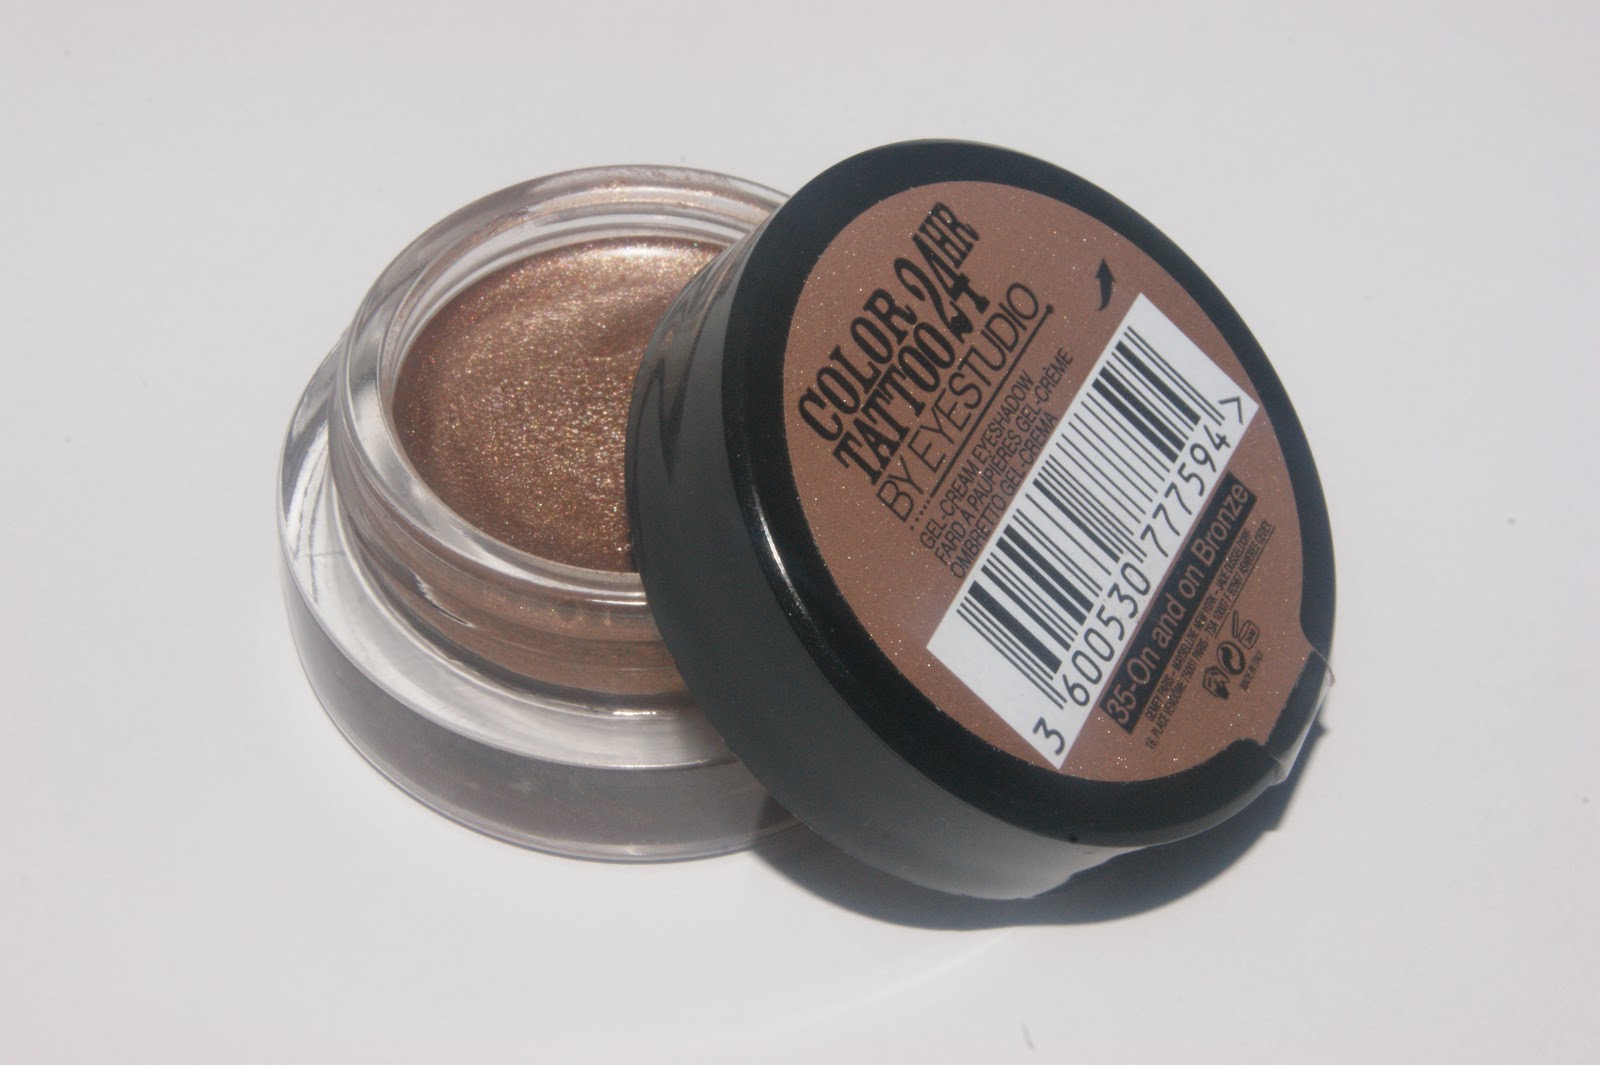 | Color Maybelline On in The and Tattoo - Girl Sunday Review On 24hr Eyeshadow Bronze